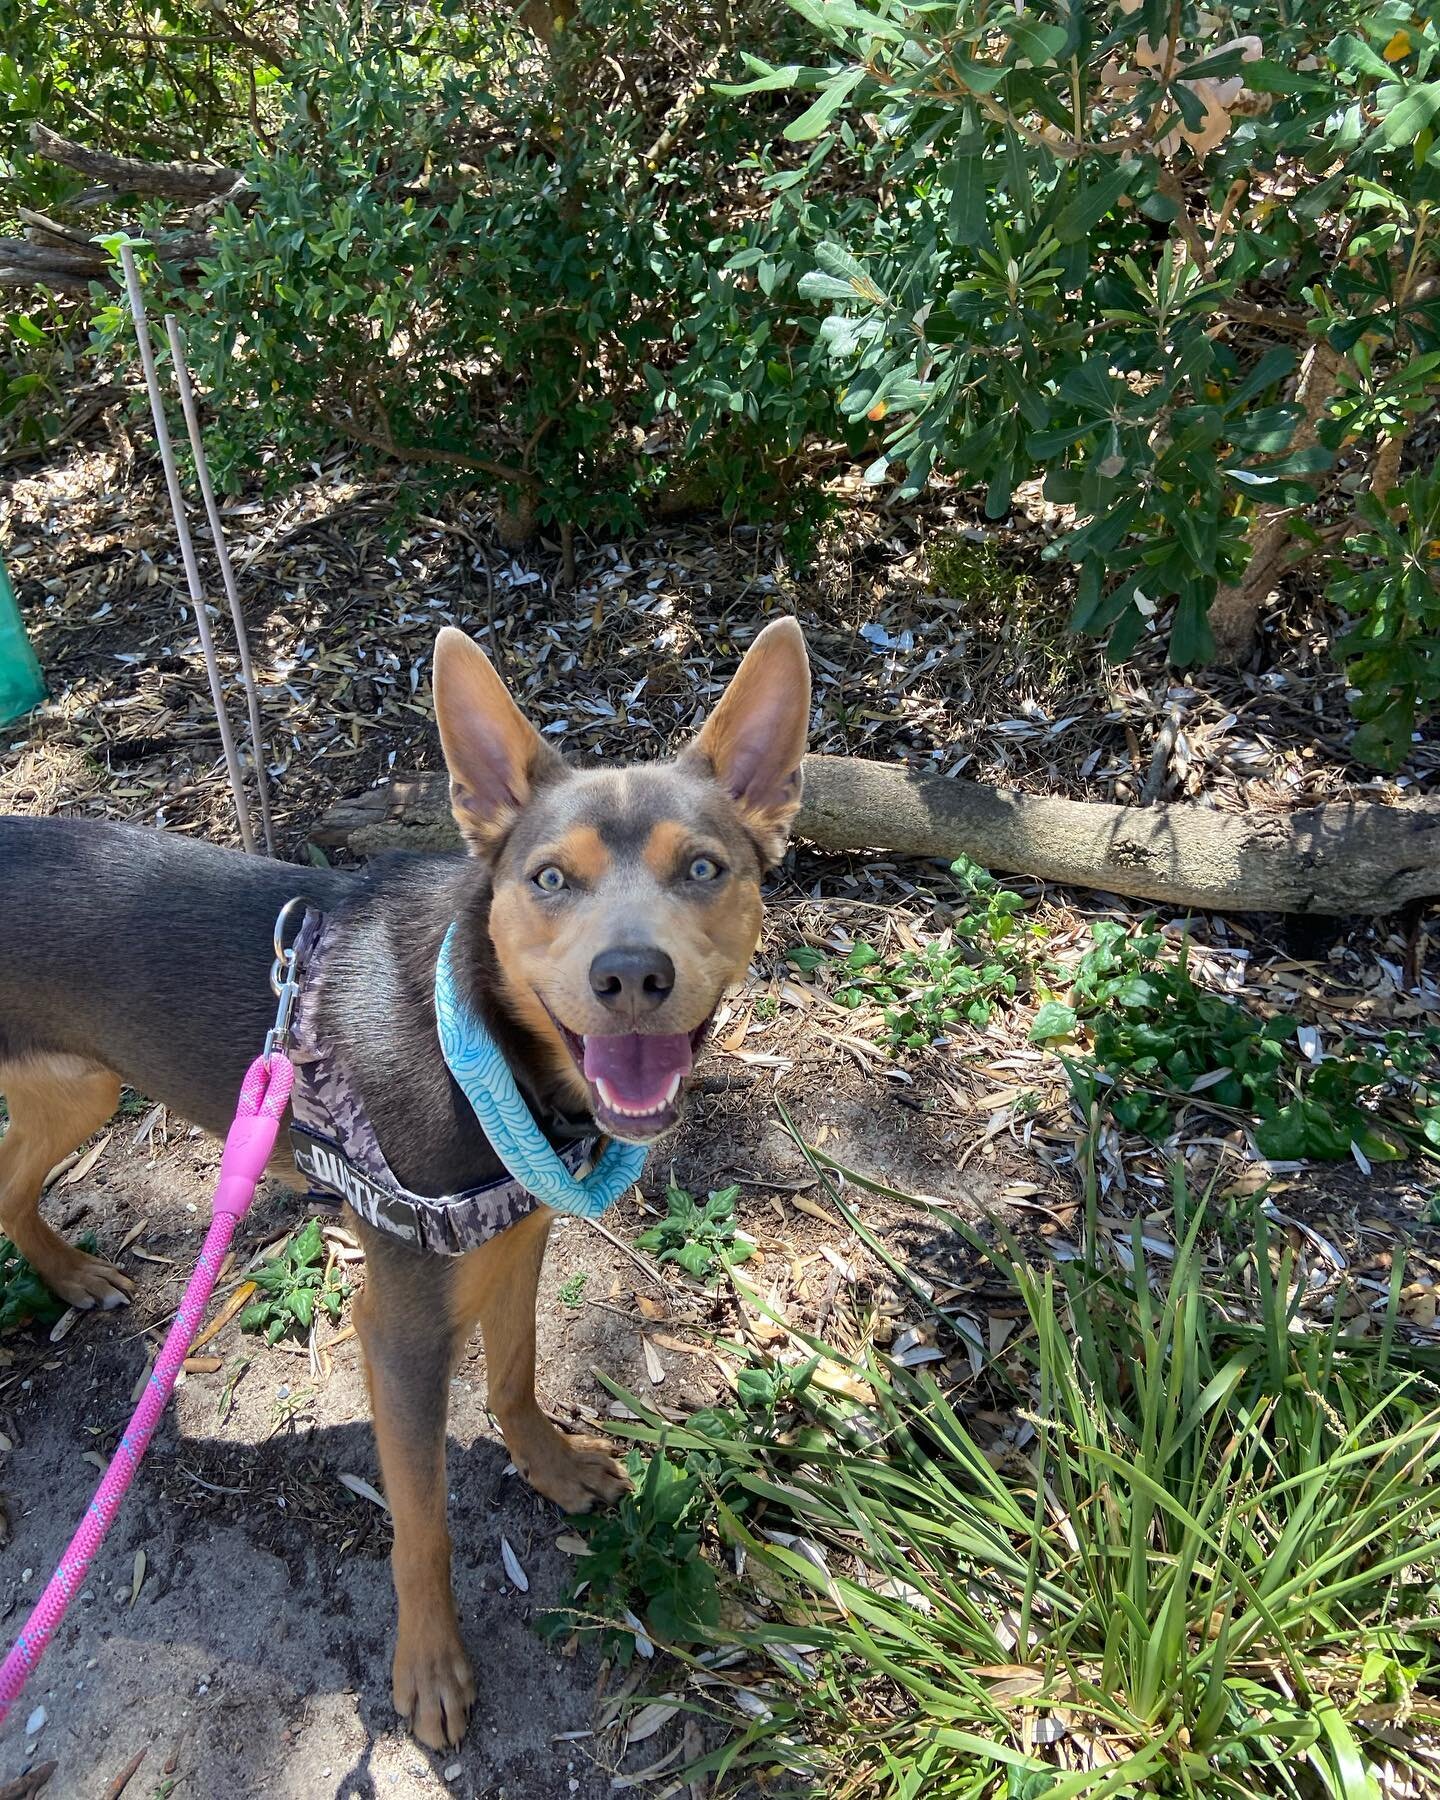 Dusty is a kelpie who loves a great view. He loved our walk around Long Reef and all the bushes and tracks he could sniff along the way. 

#petaupair #dog #dogsofsydney #kelpie #northernbeaches #northernbeachesmums #northernbeachessydney #longreef #c